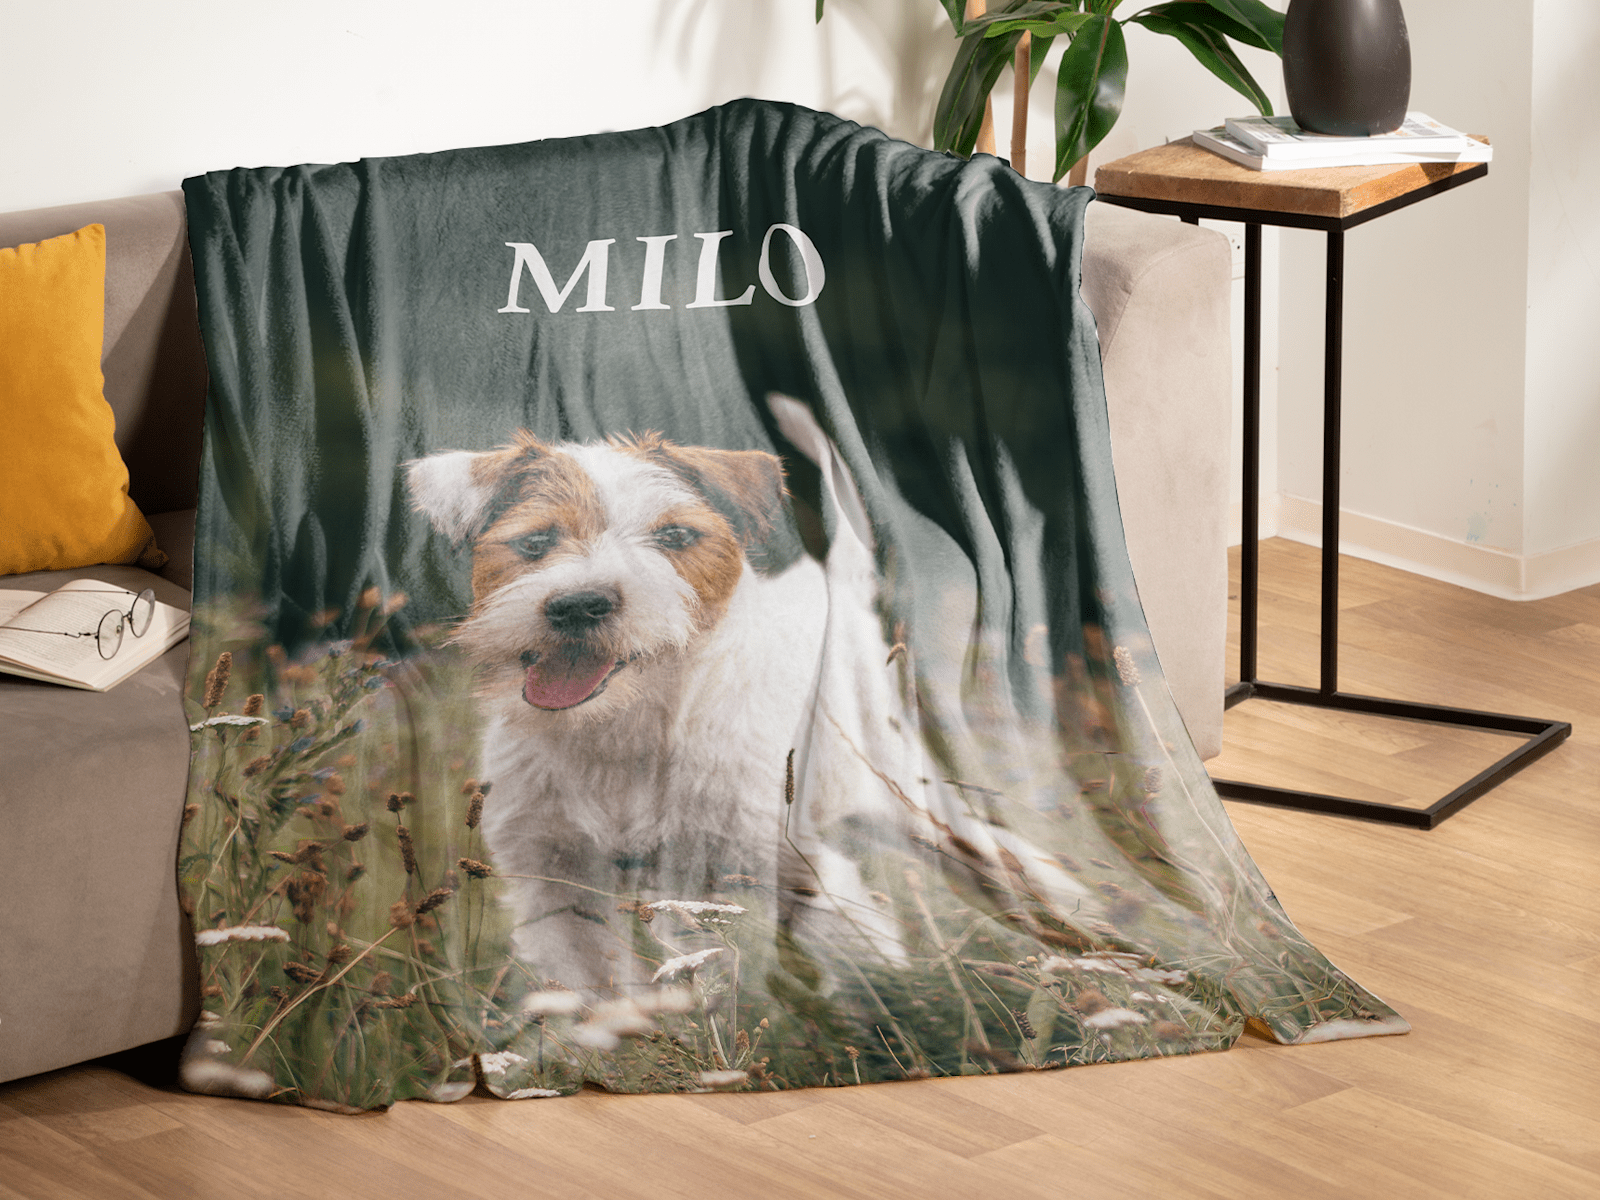 Larger version: personalised blanket with dog photo